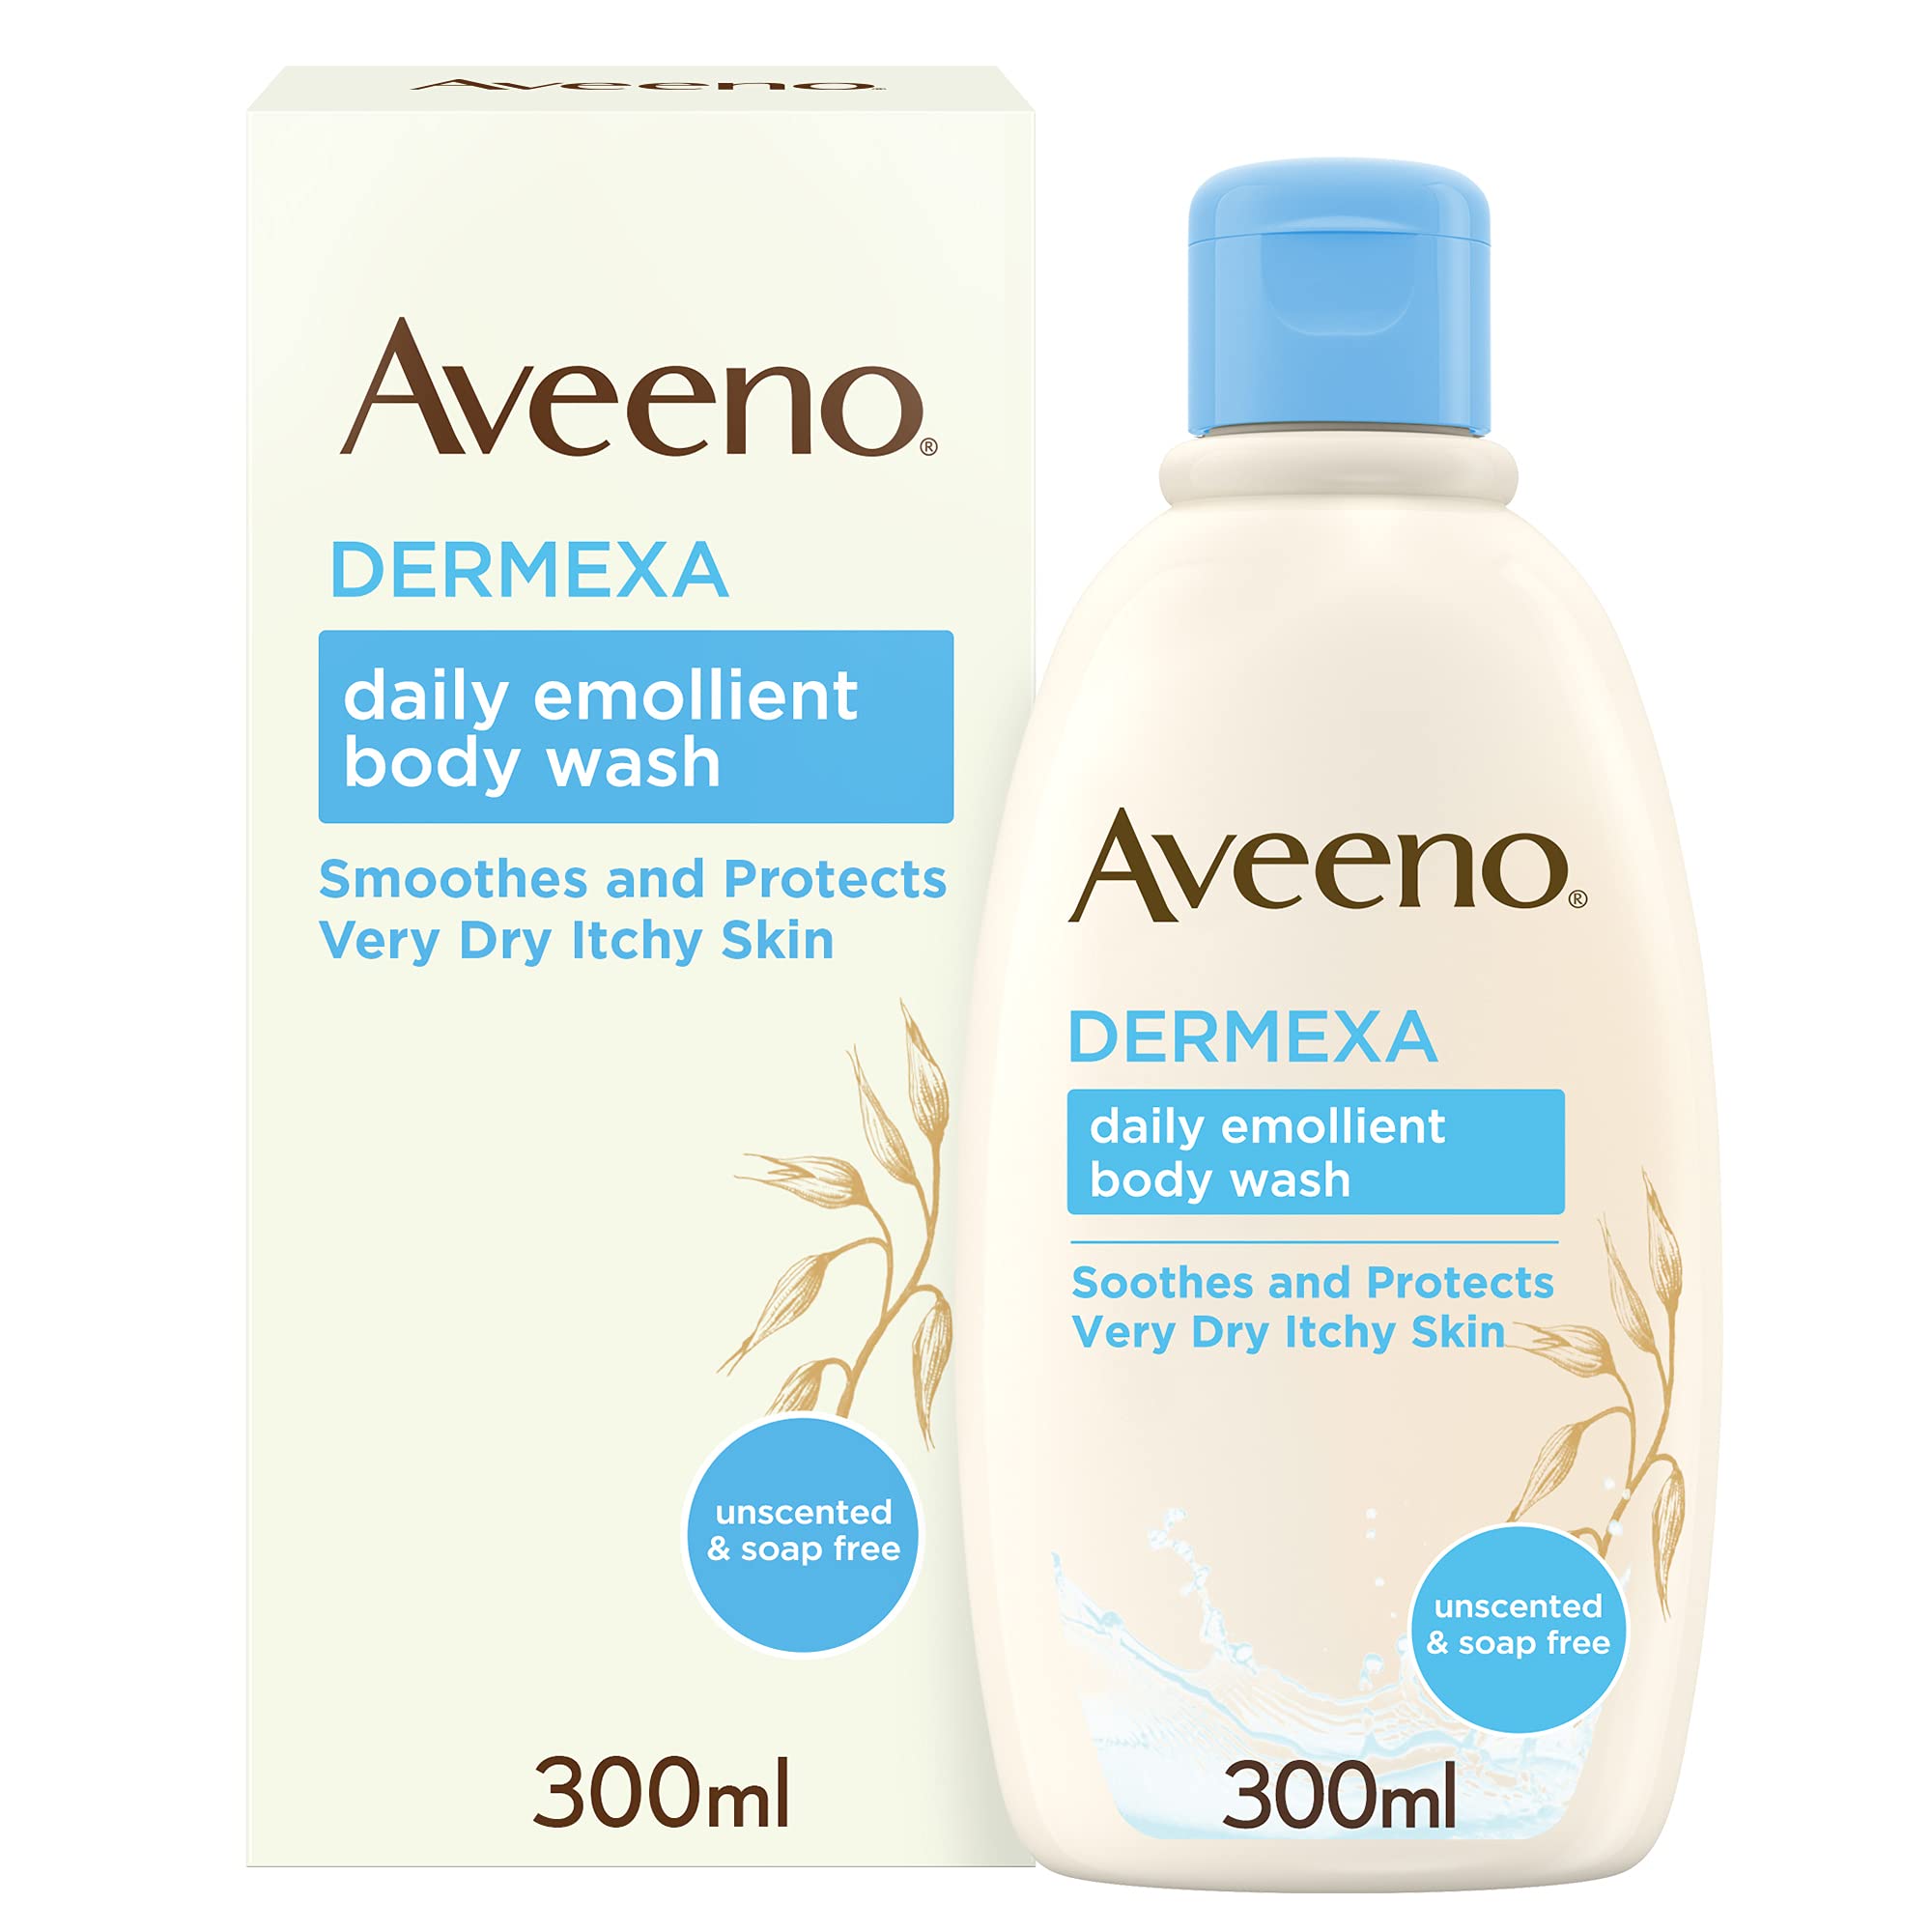 Aveeno Dermexa Daily Emollient Body Wash, Gently cleanses and Soothes ...